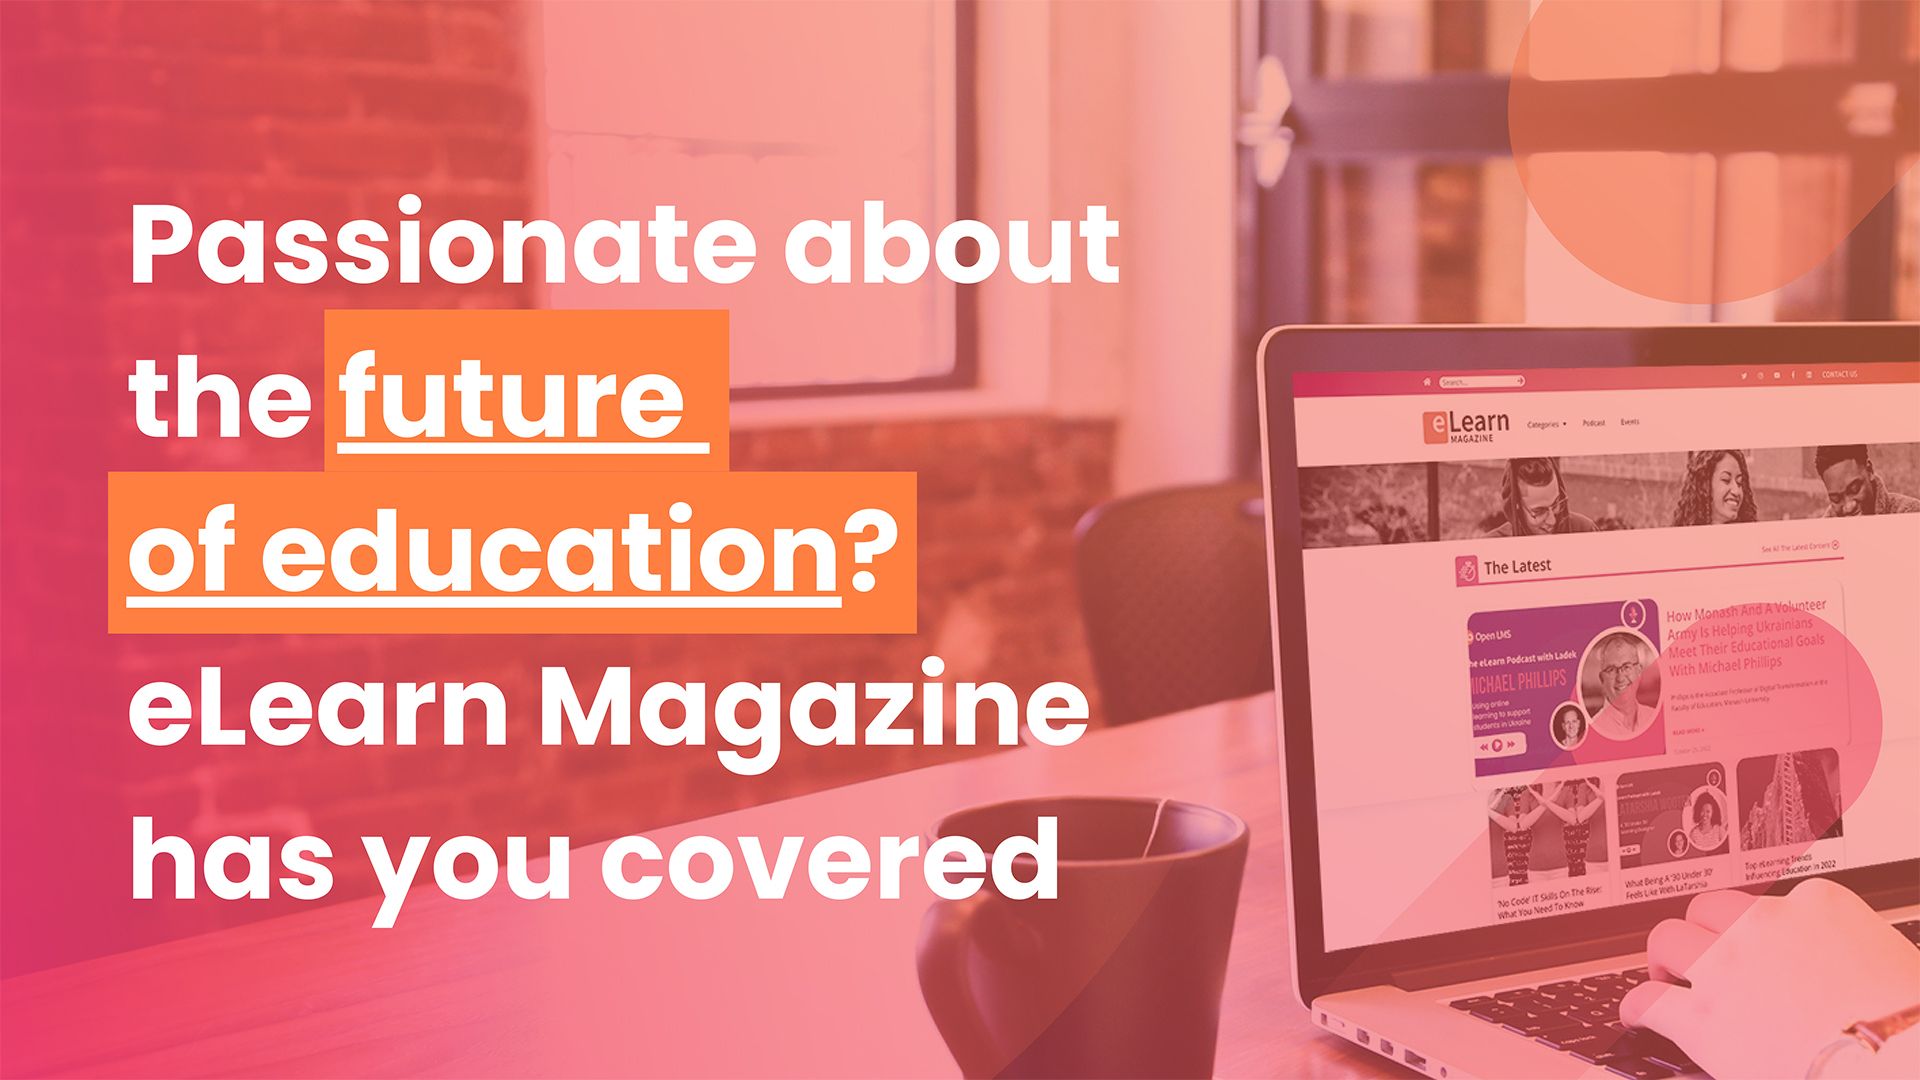 Passionate about the future of education? eLearn Magazine has you covered